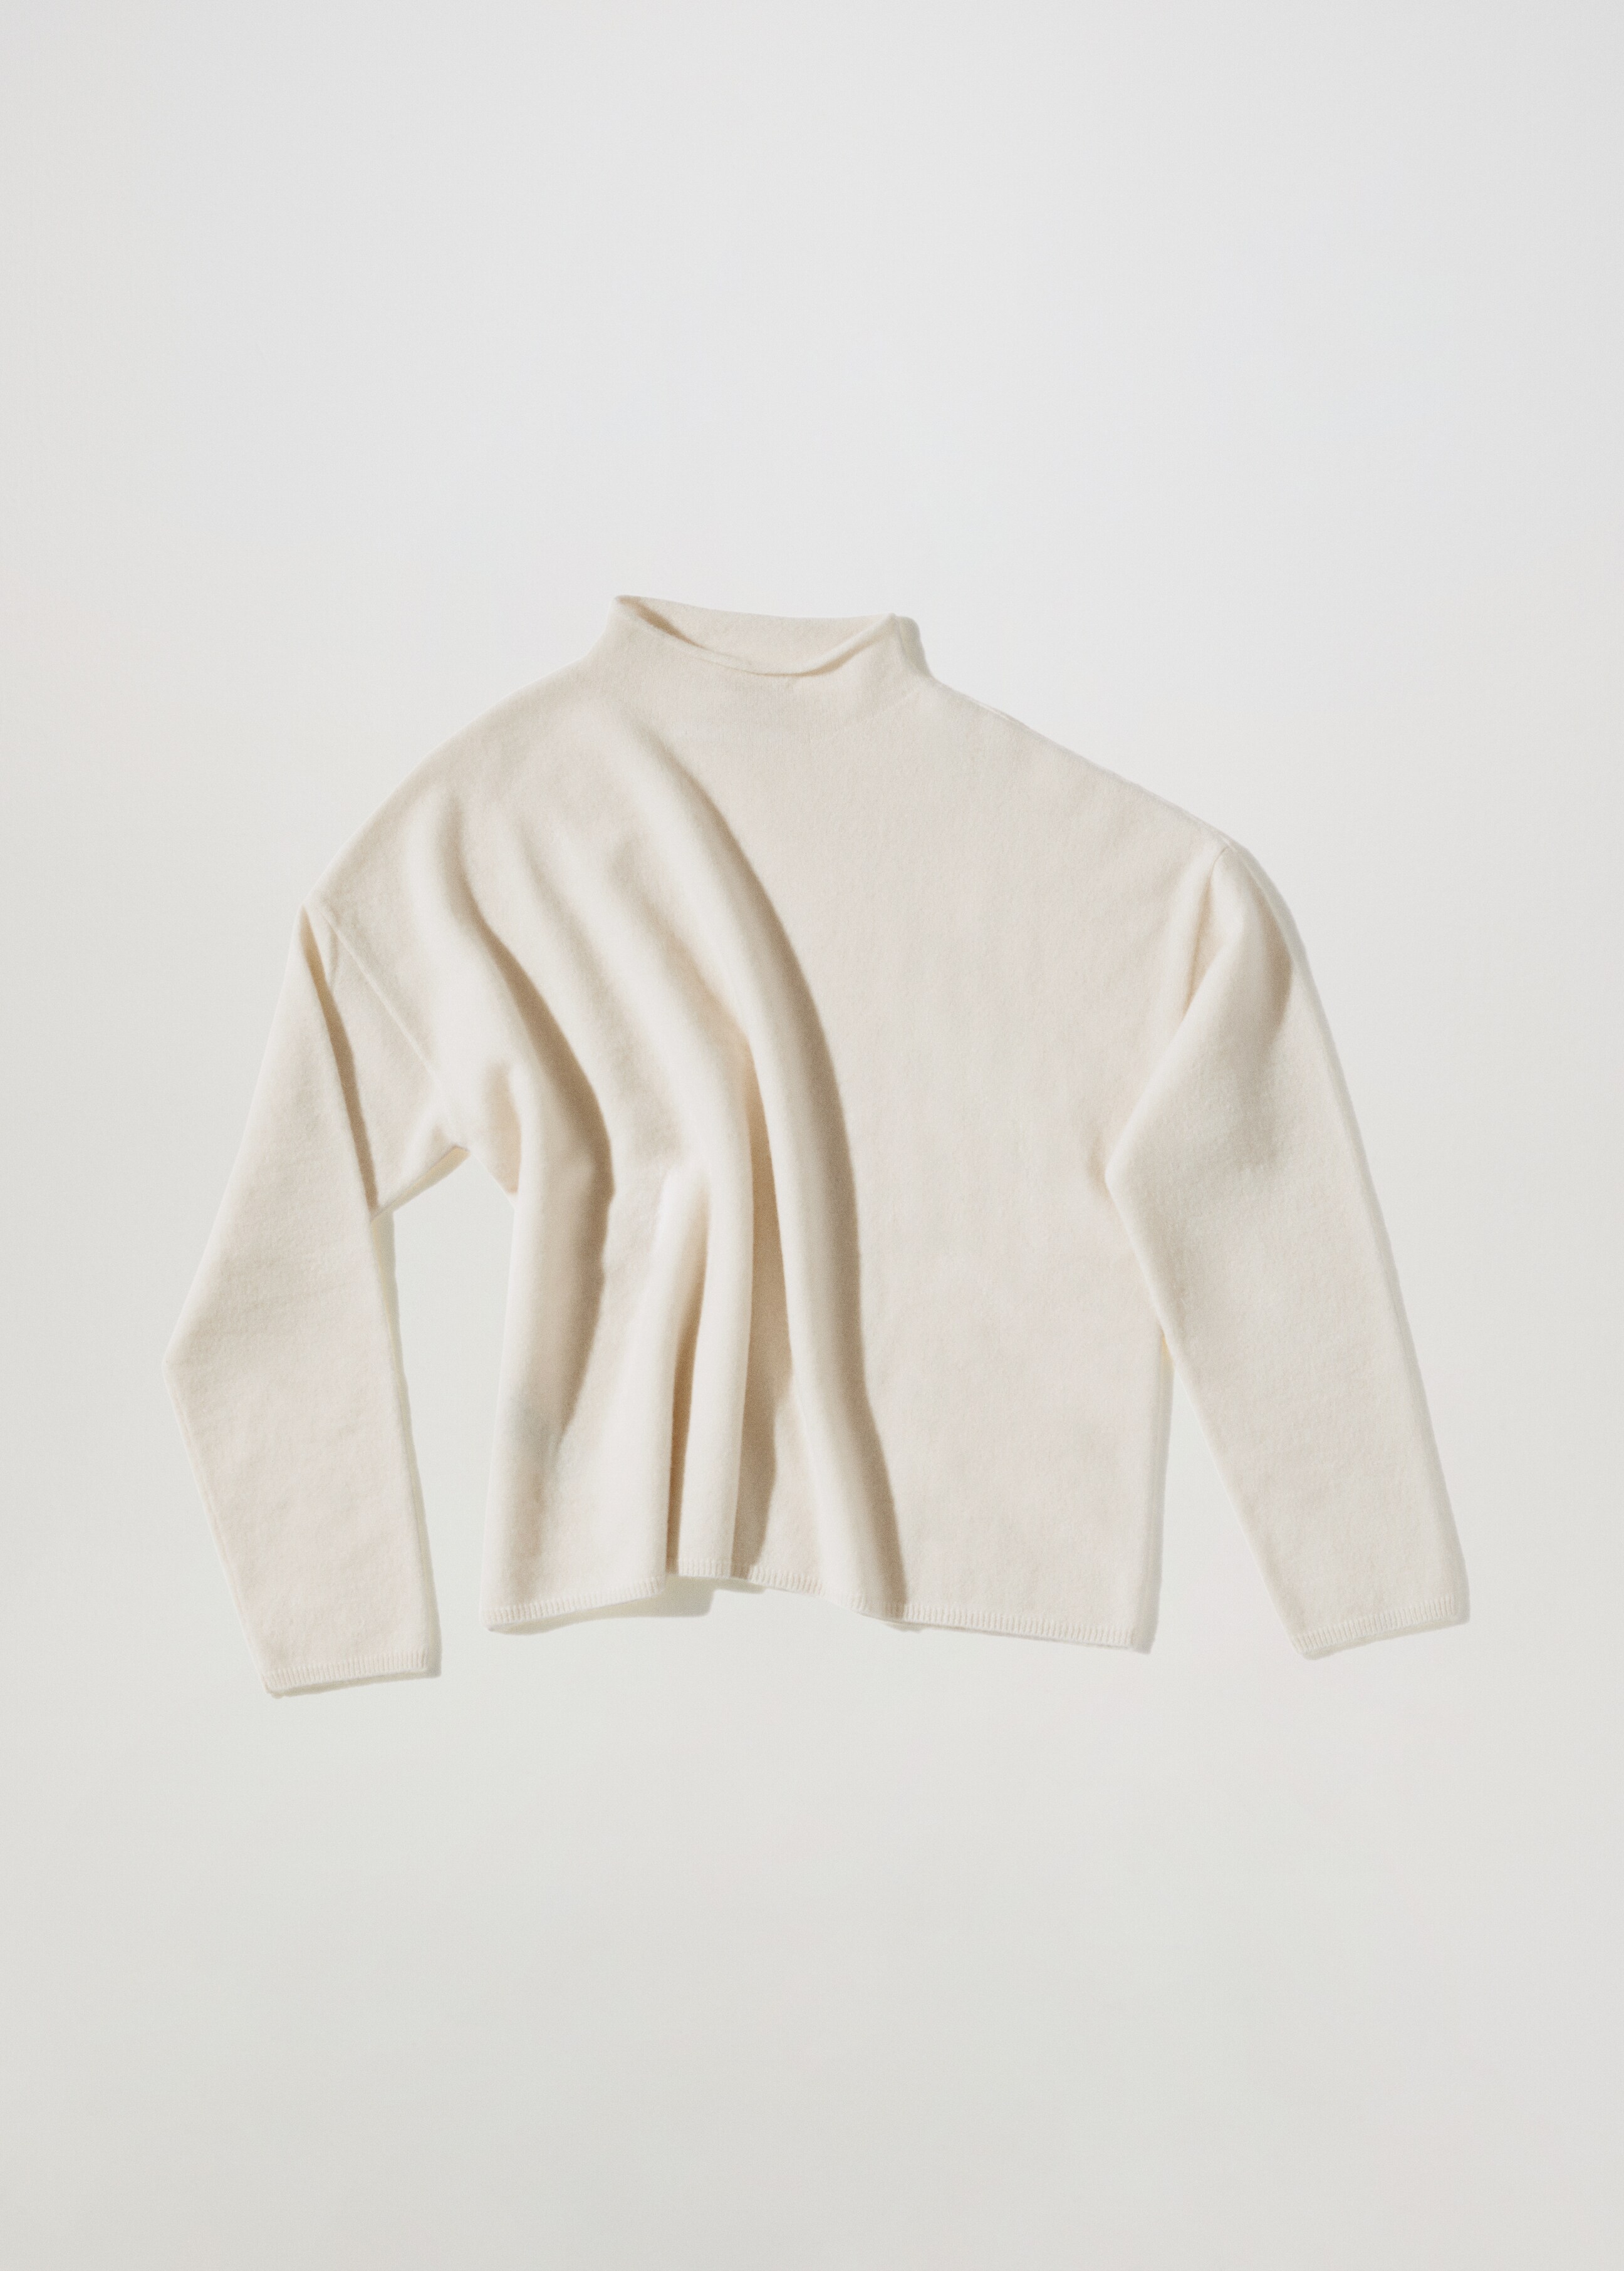 Perkins-neck 100% cashmere sweater - Article without model